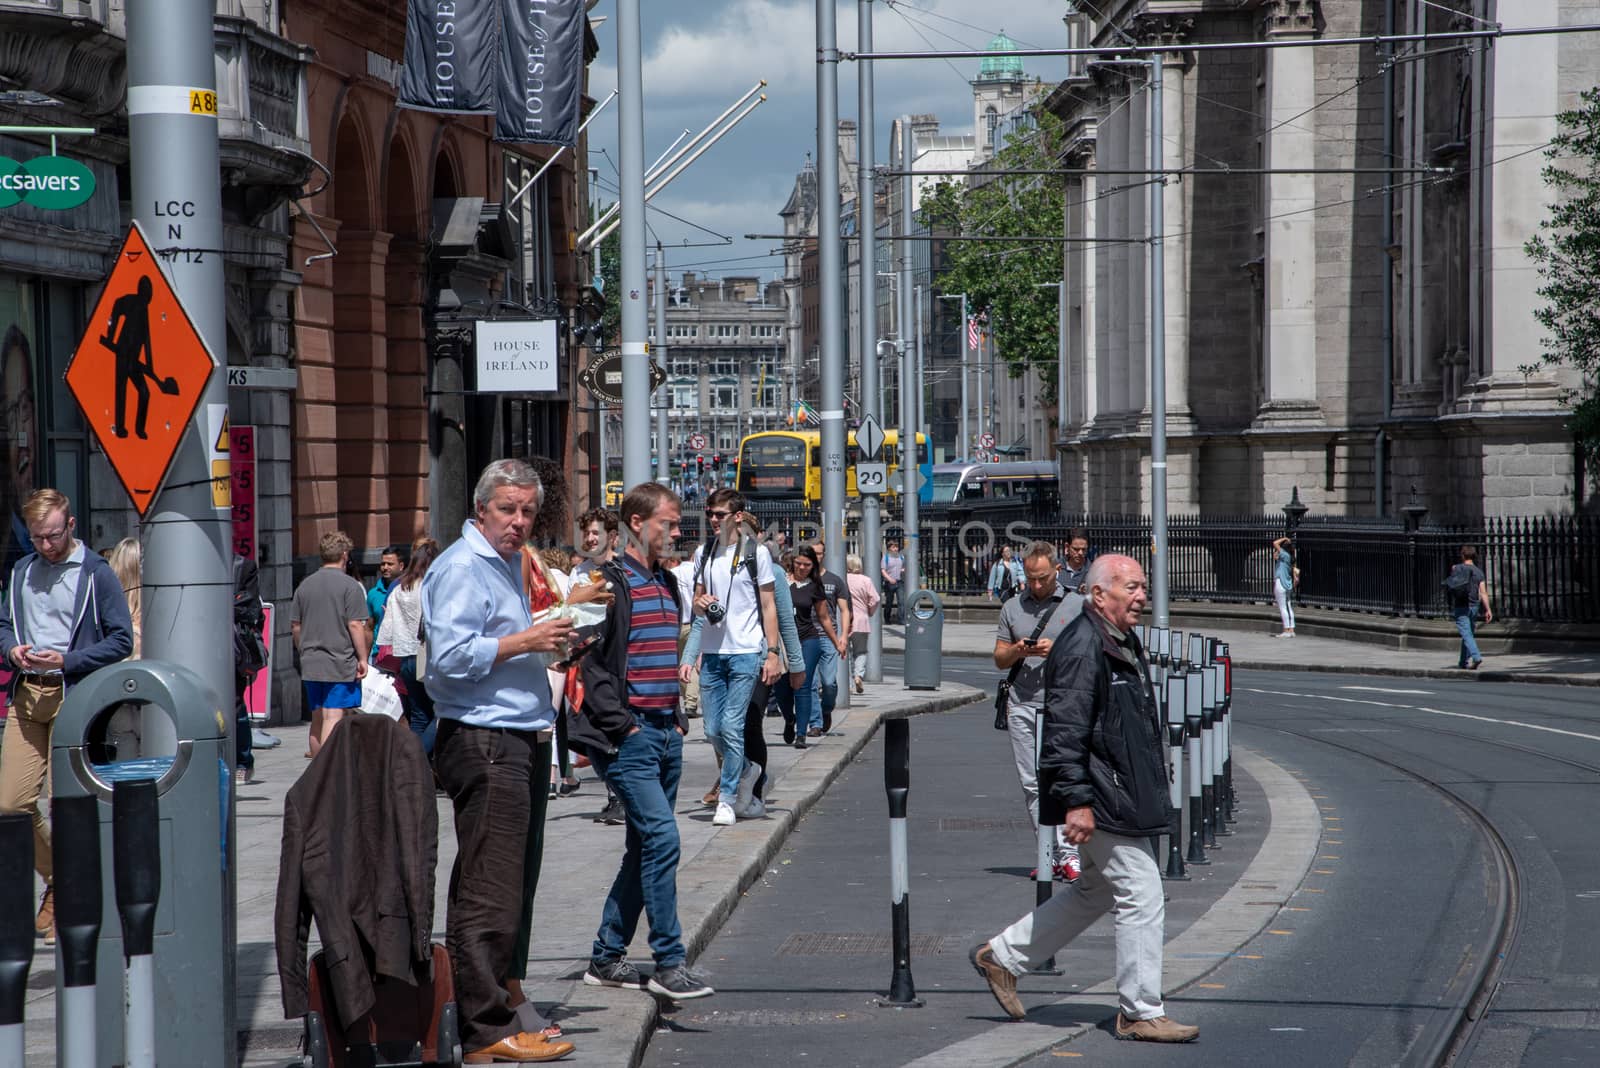 Dublin's Busy Streets by jfbenning